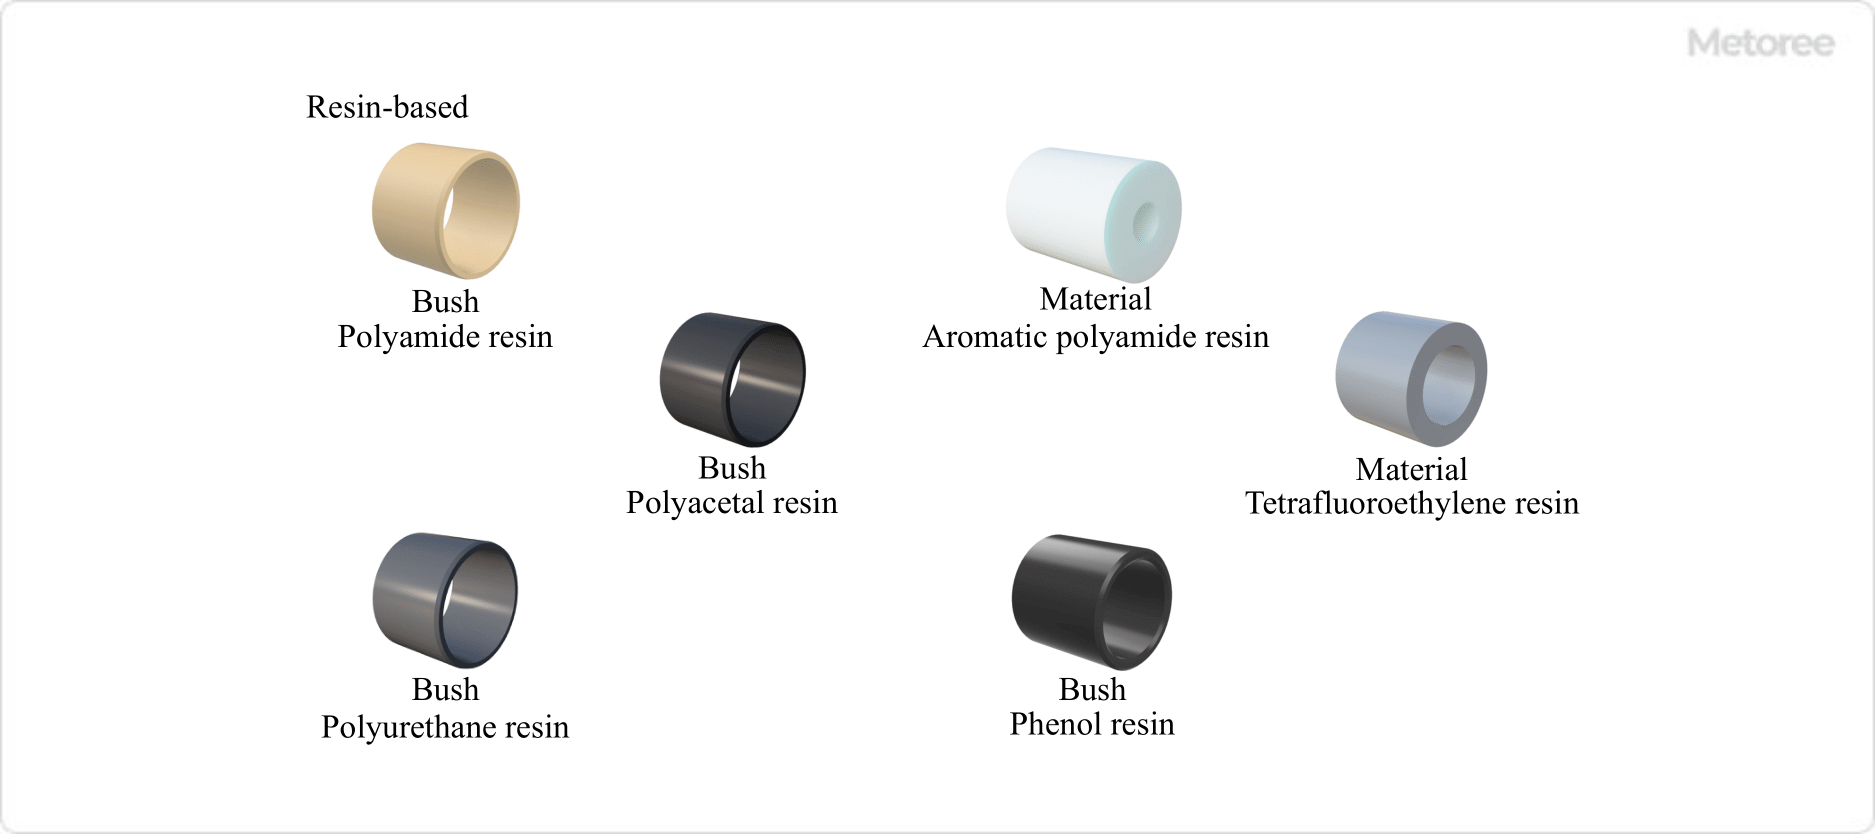 Figure 4. Types by material (Resin-based, Multi-layered)